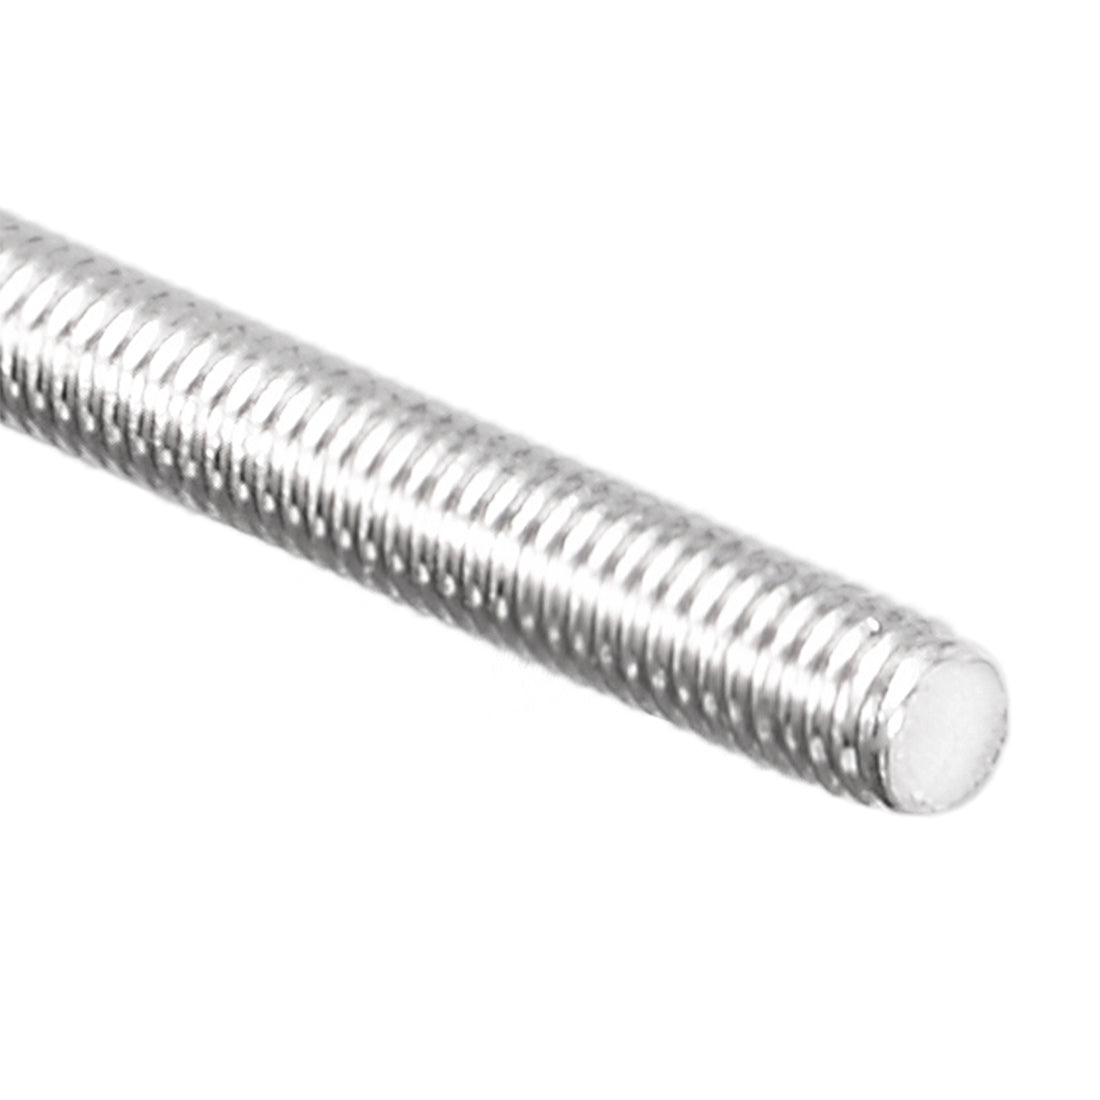 uxcell Uxcell M3 x 500mm Fully Threaded Rod 304 Stainless Steel Right Hand Threads